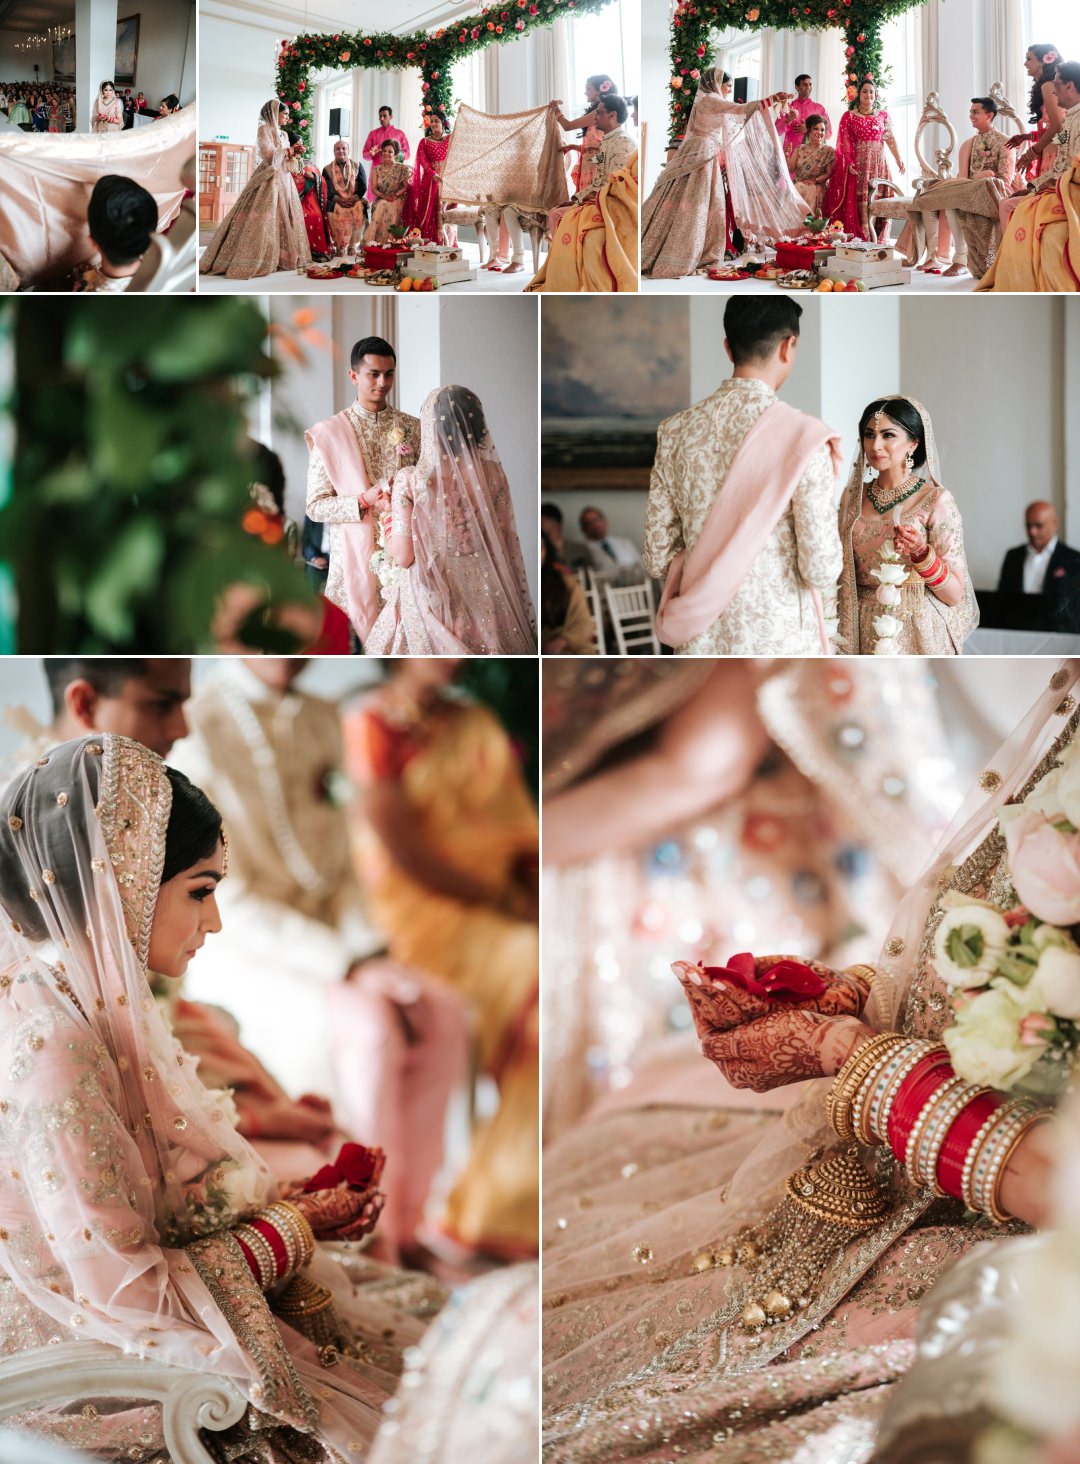 Bride and groom see each other for the first time and the Asian wedding begins at Heythrop Park